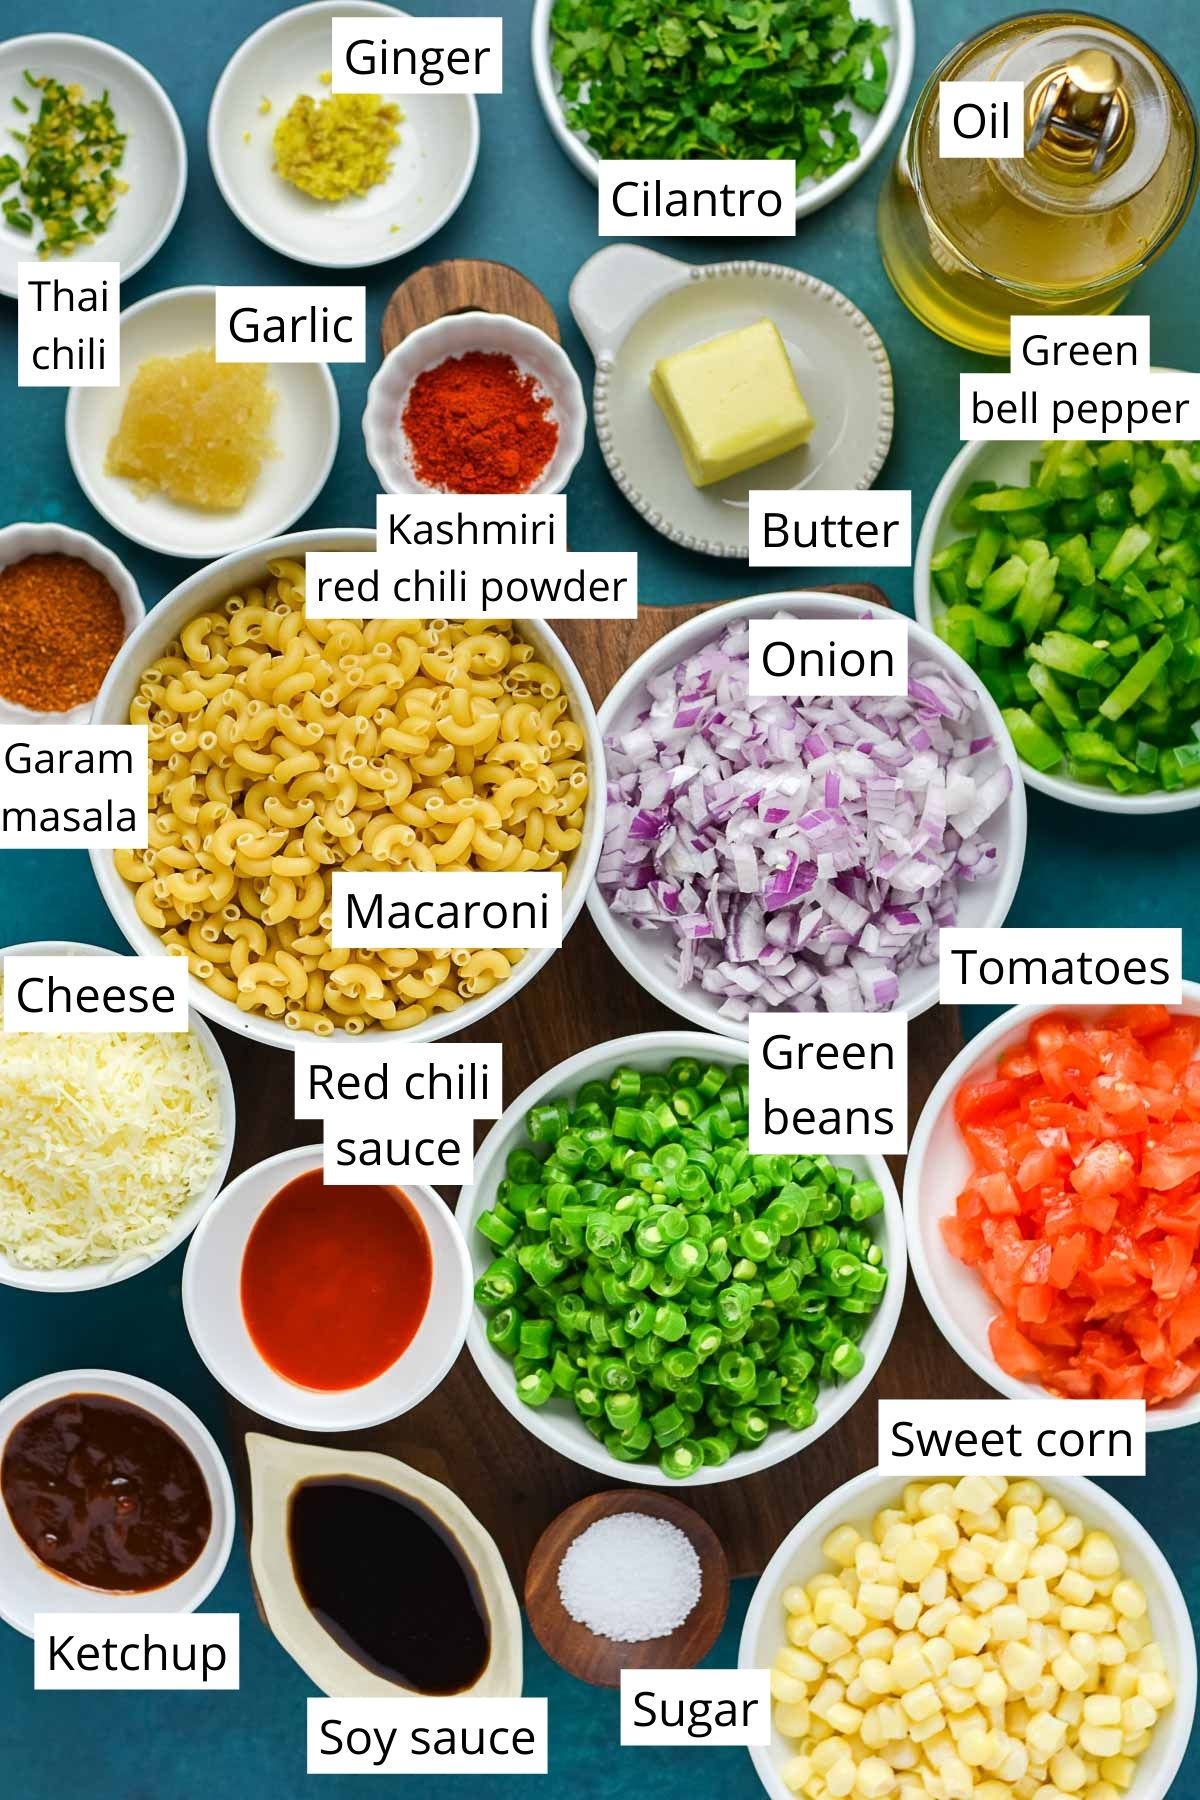 All the ingredients for masala macaroni measured and laid out in little bowls